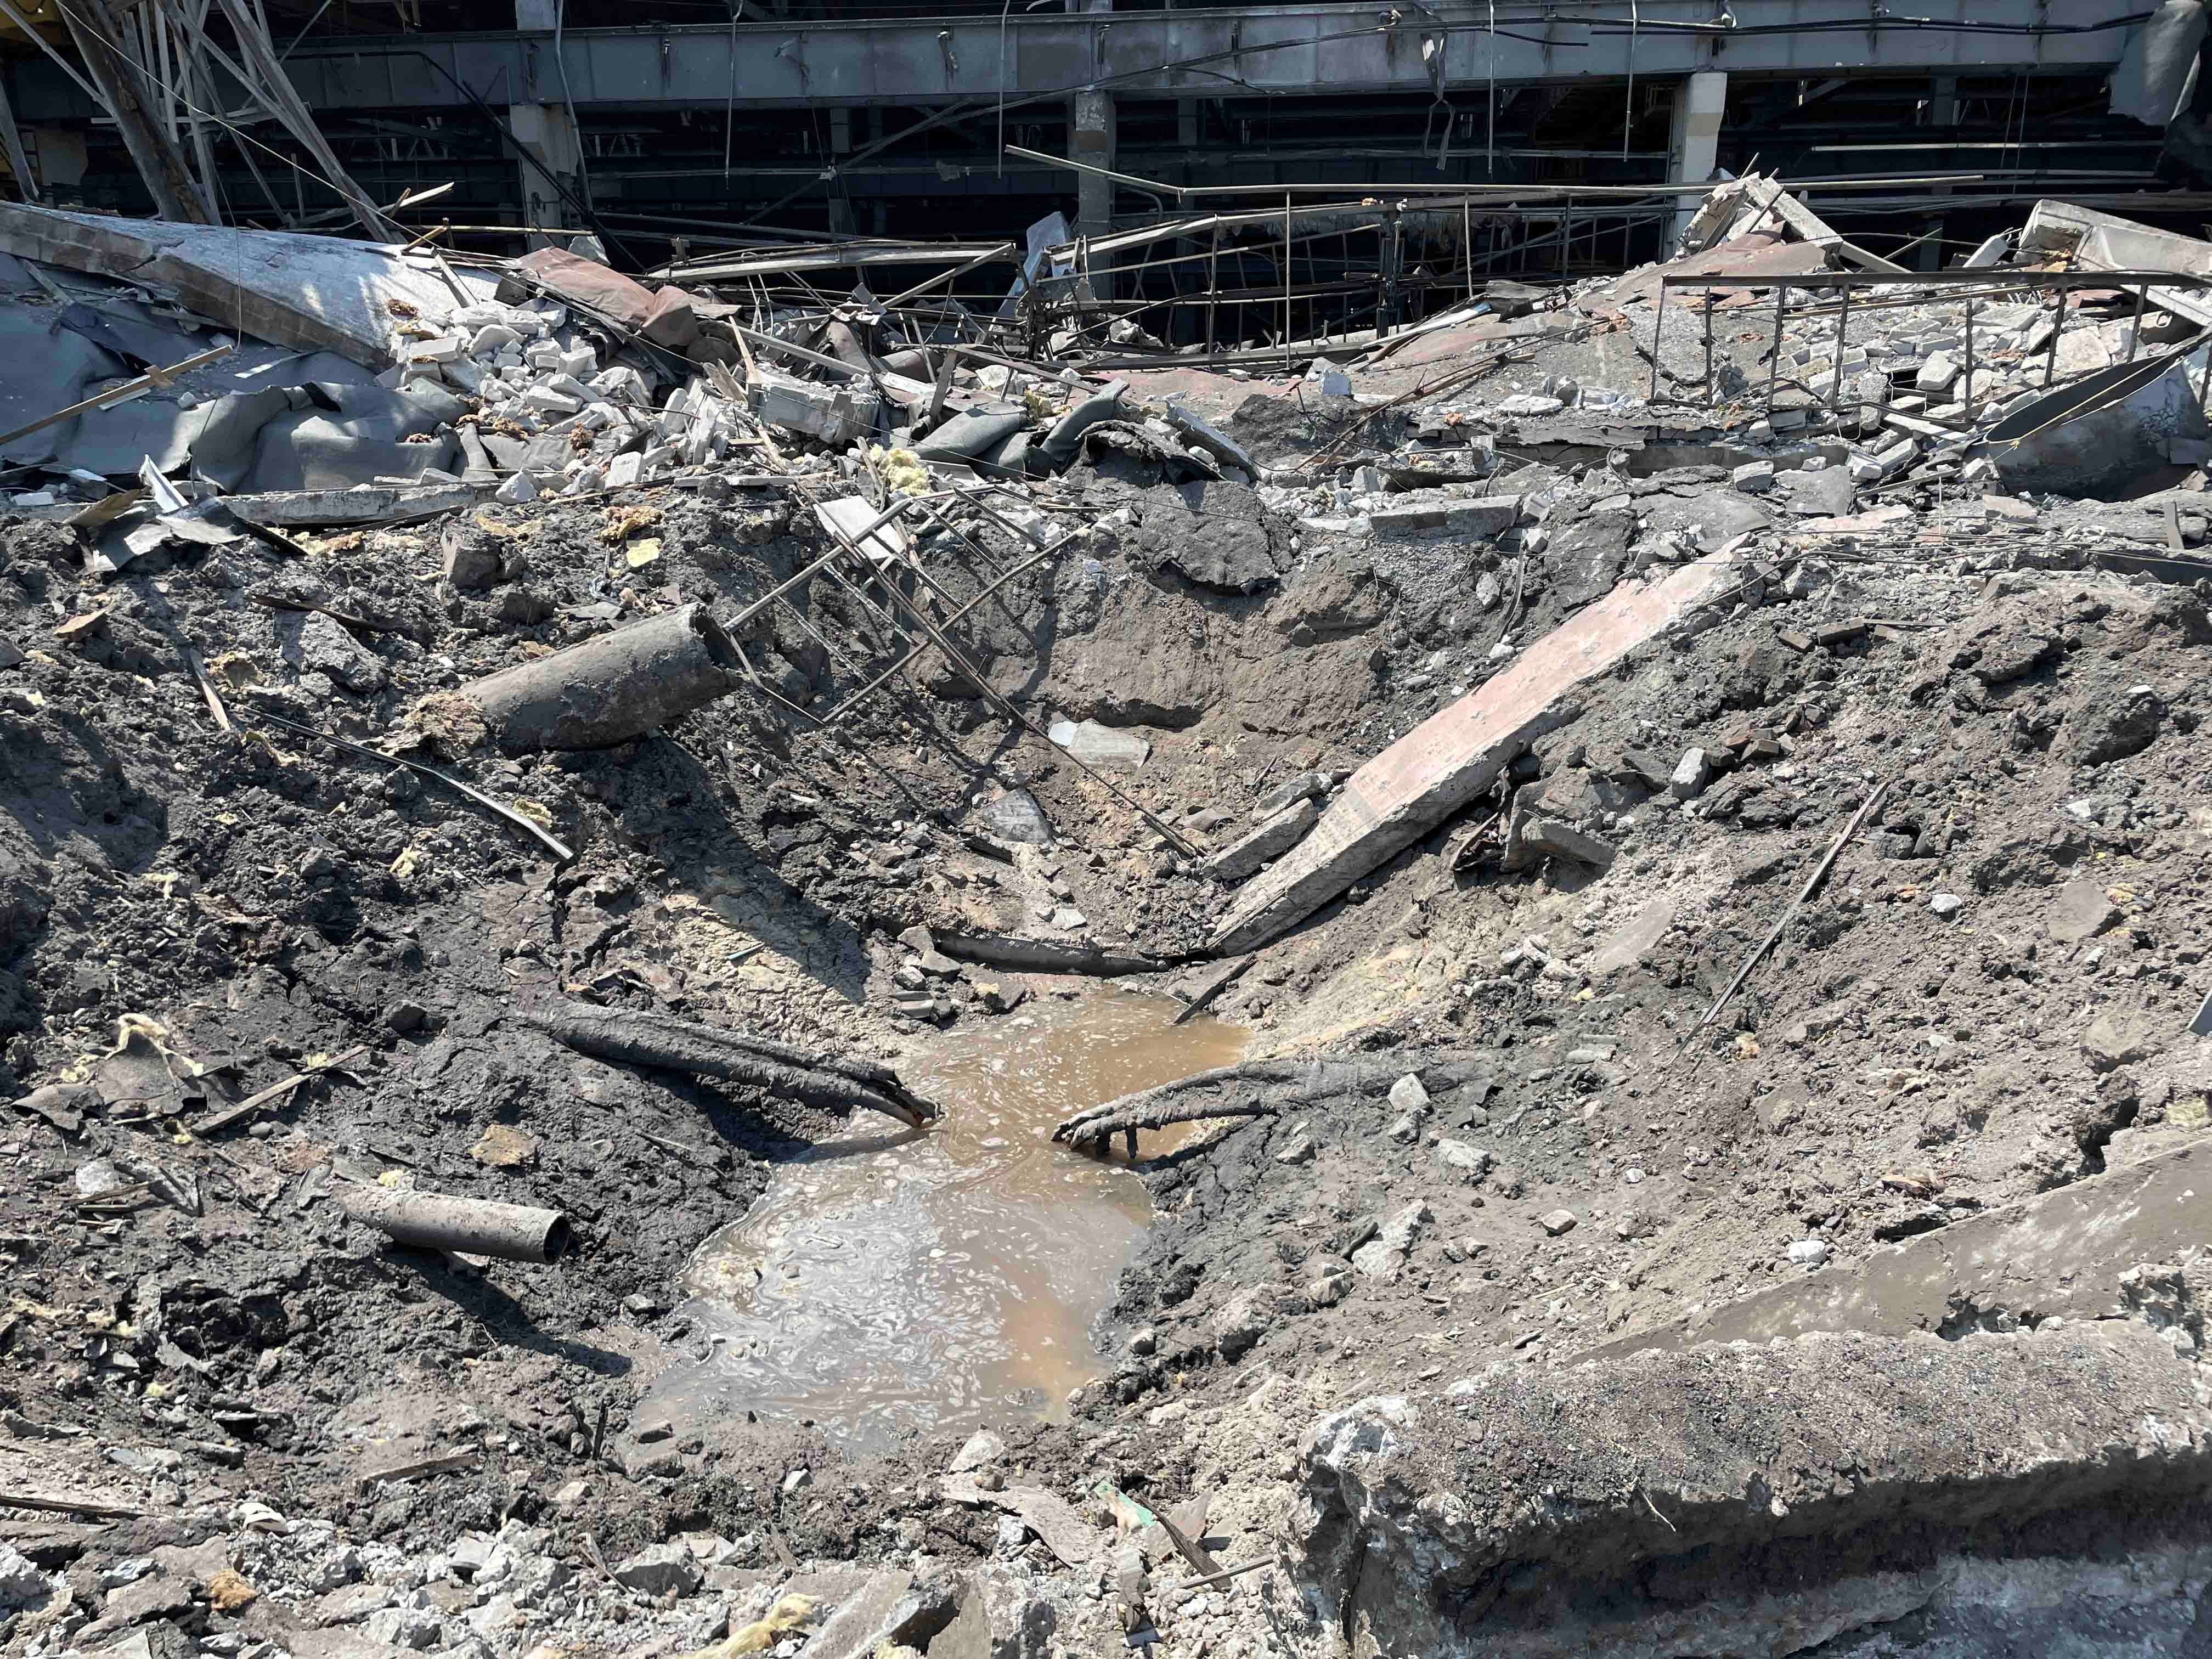 Impact crater at the Kremenchuk Road Vehicle Factory, a large industrial complex adjacent to the shopping center. Photo taken on June 29, 2022. 